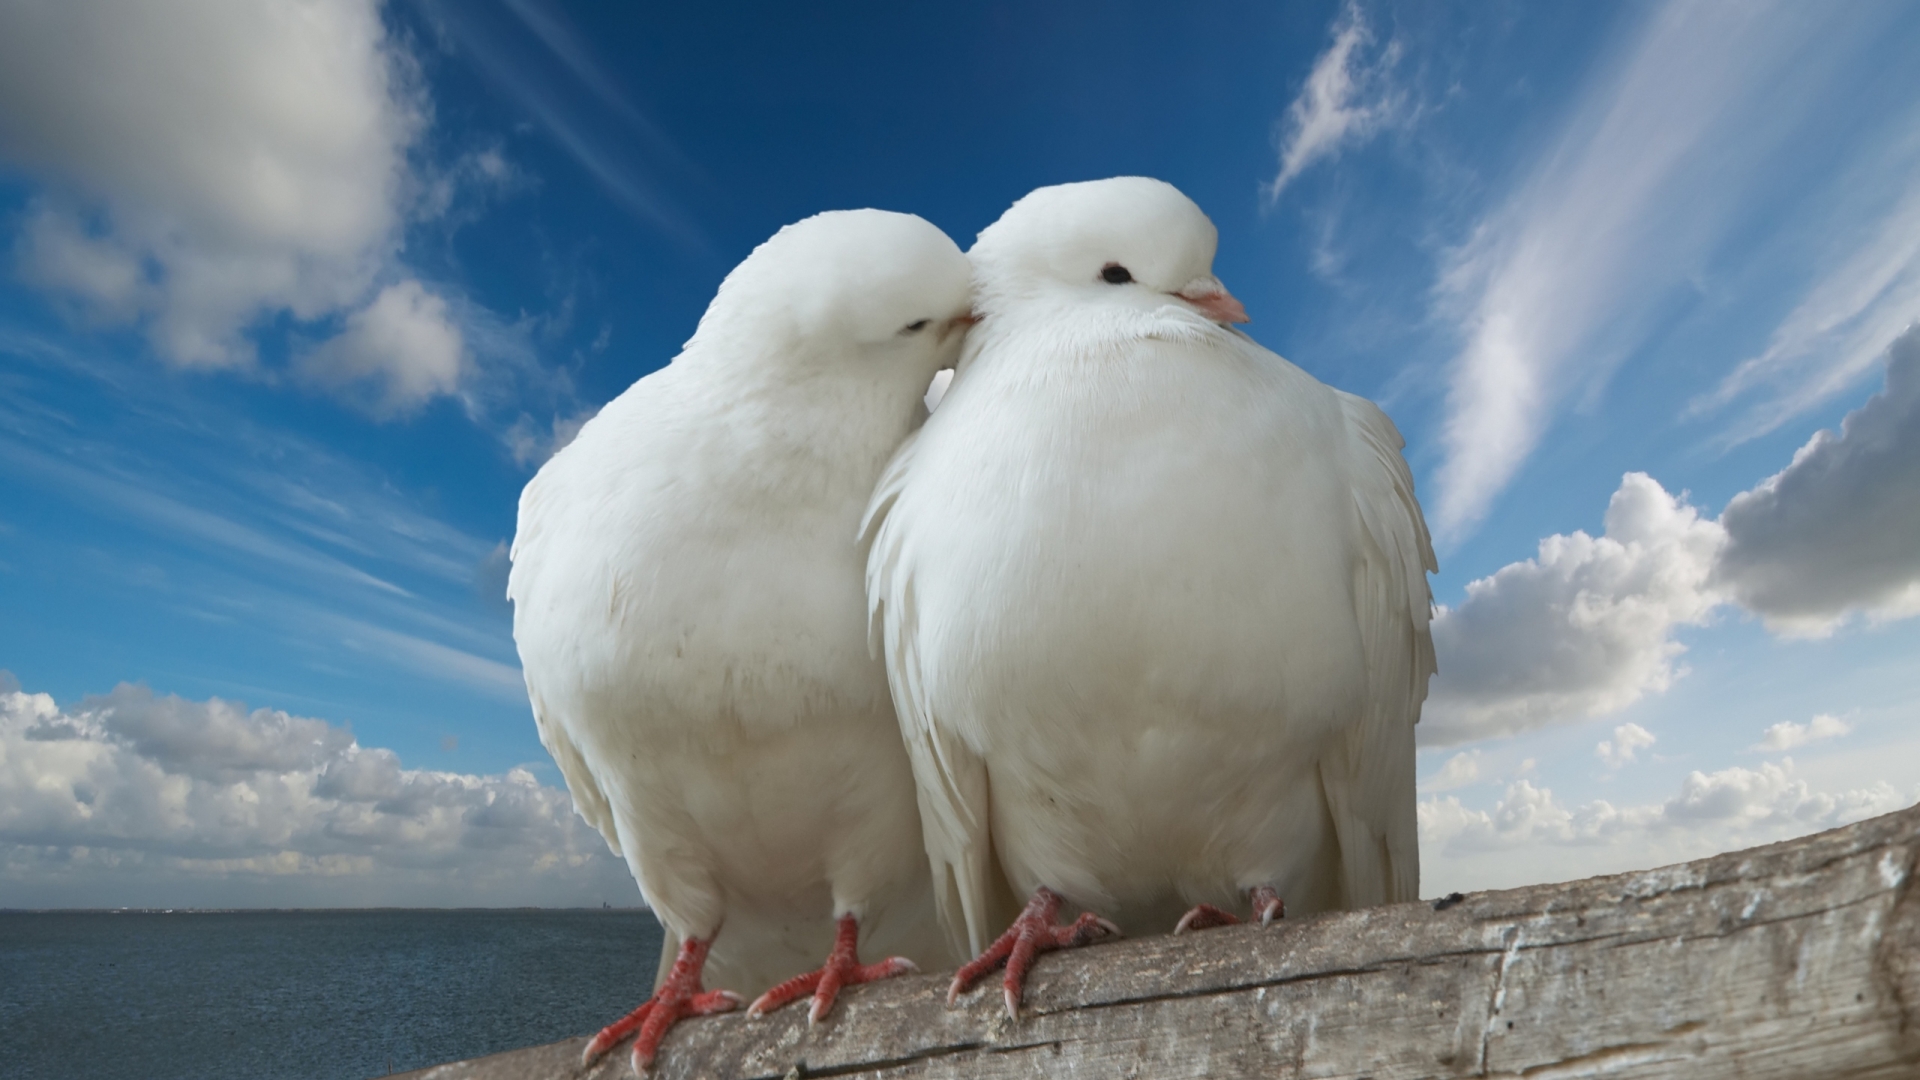 Pigeons in Love for 1920 x 1080 HDTV 1080p resolution